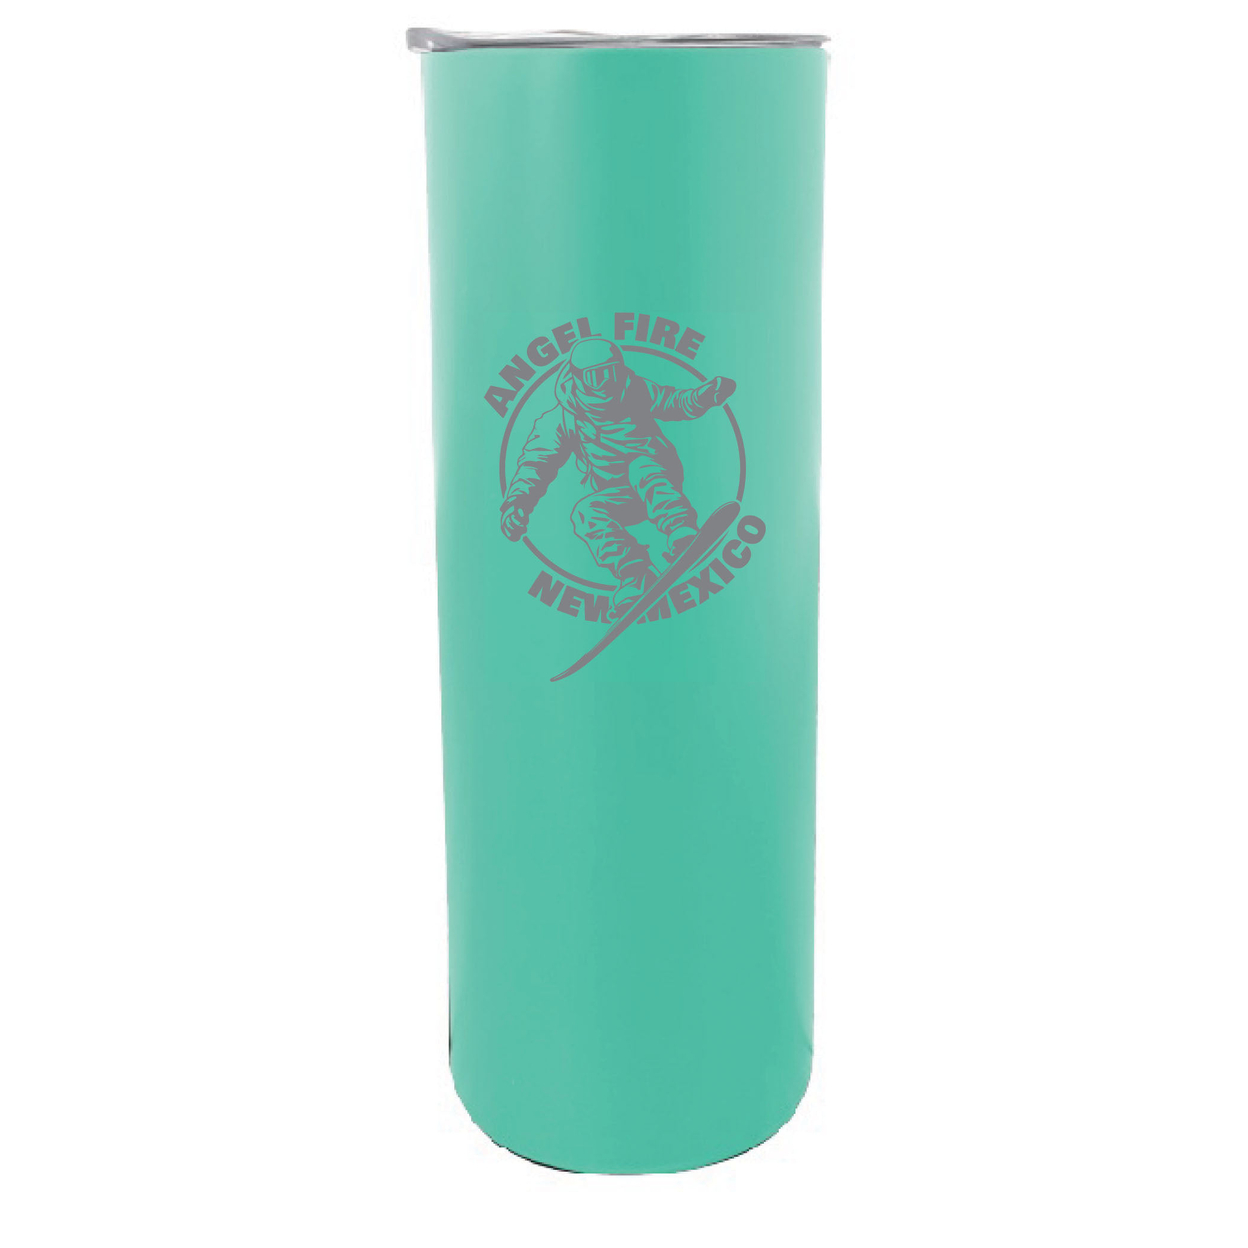 Angel Fire New Mexico Souvenir 20 Oz Engraved Insulated Stainless Steel Skinny Tumbler - Purple Glitter,,Single Unit